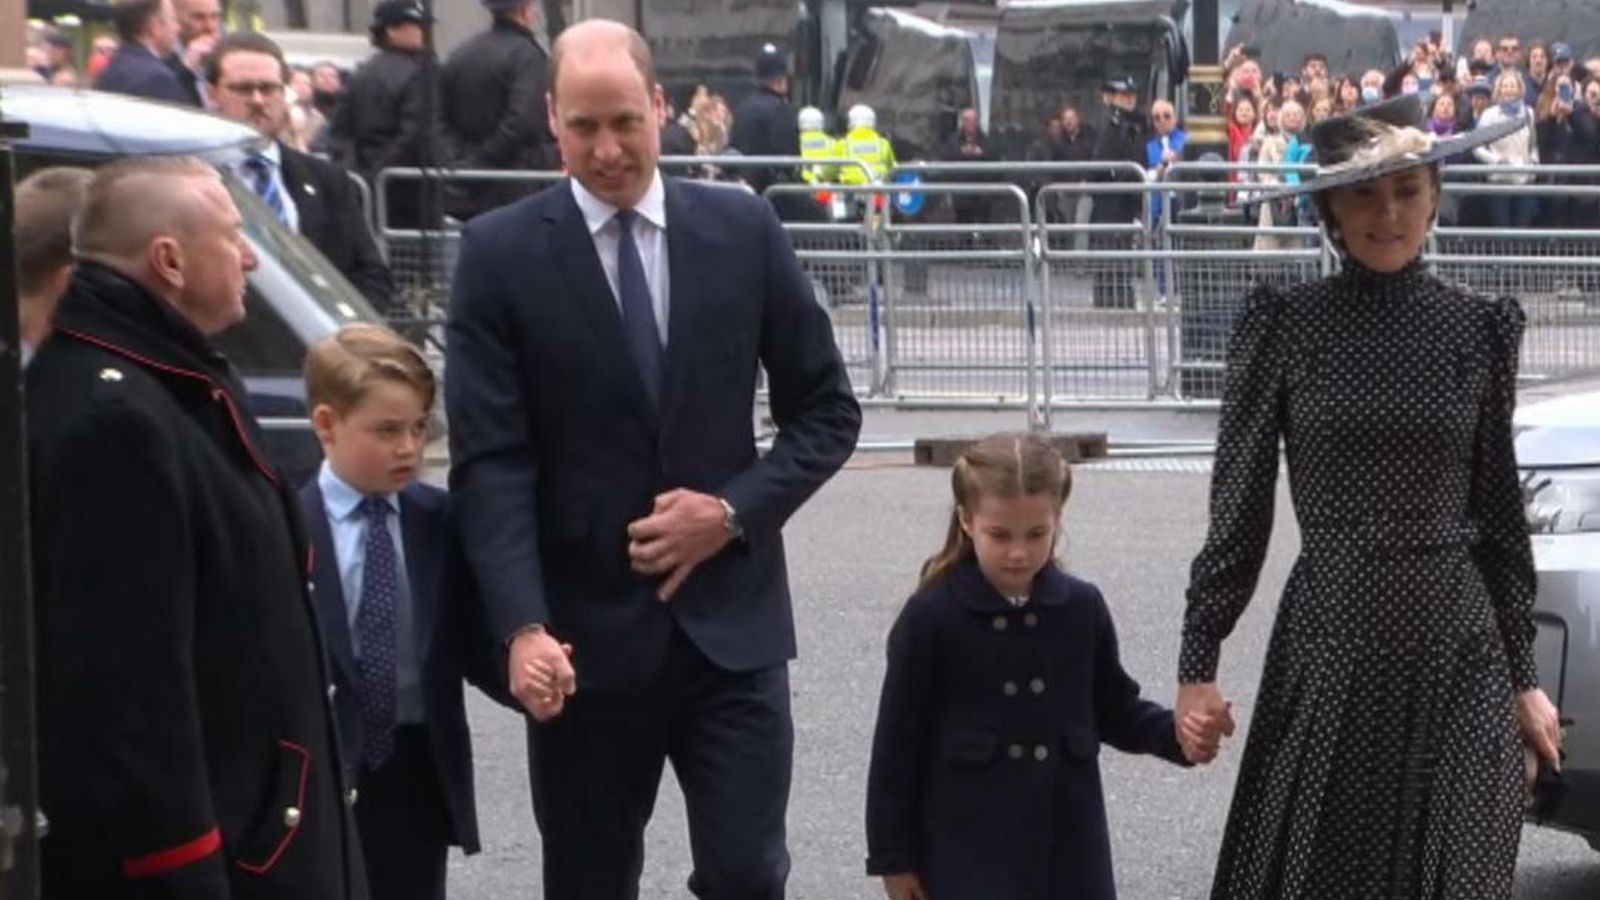 Kate Middleton Attends Prince Phillip's Memorial Service With Family